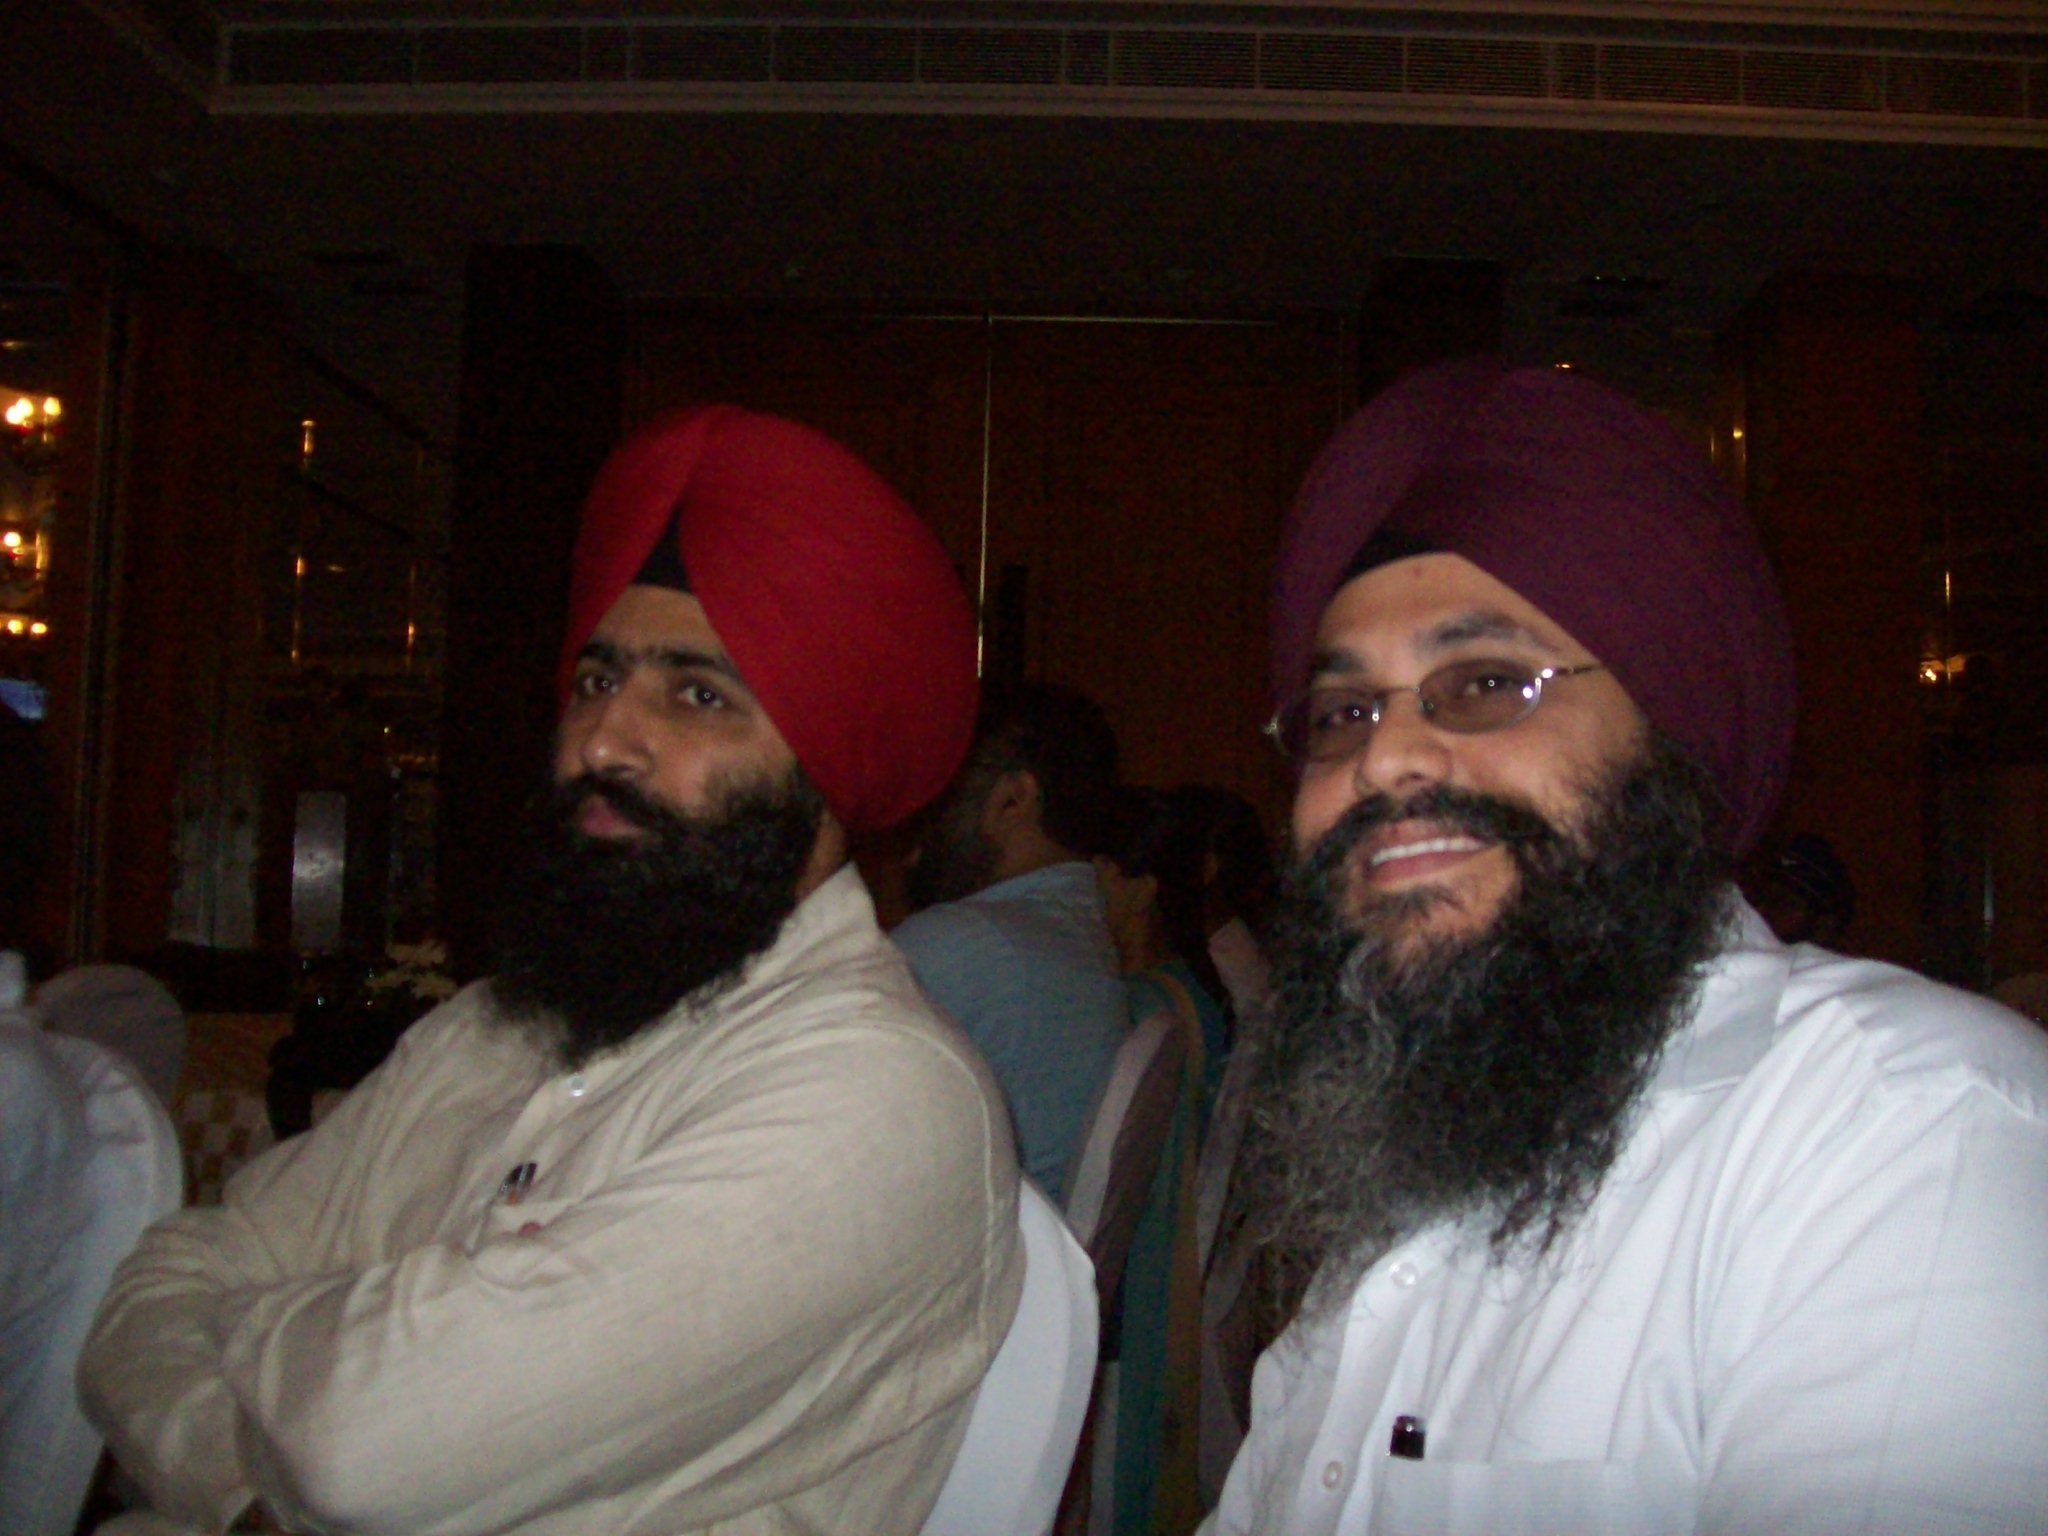 two people with long hair and turbans sitting next to each other